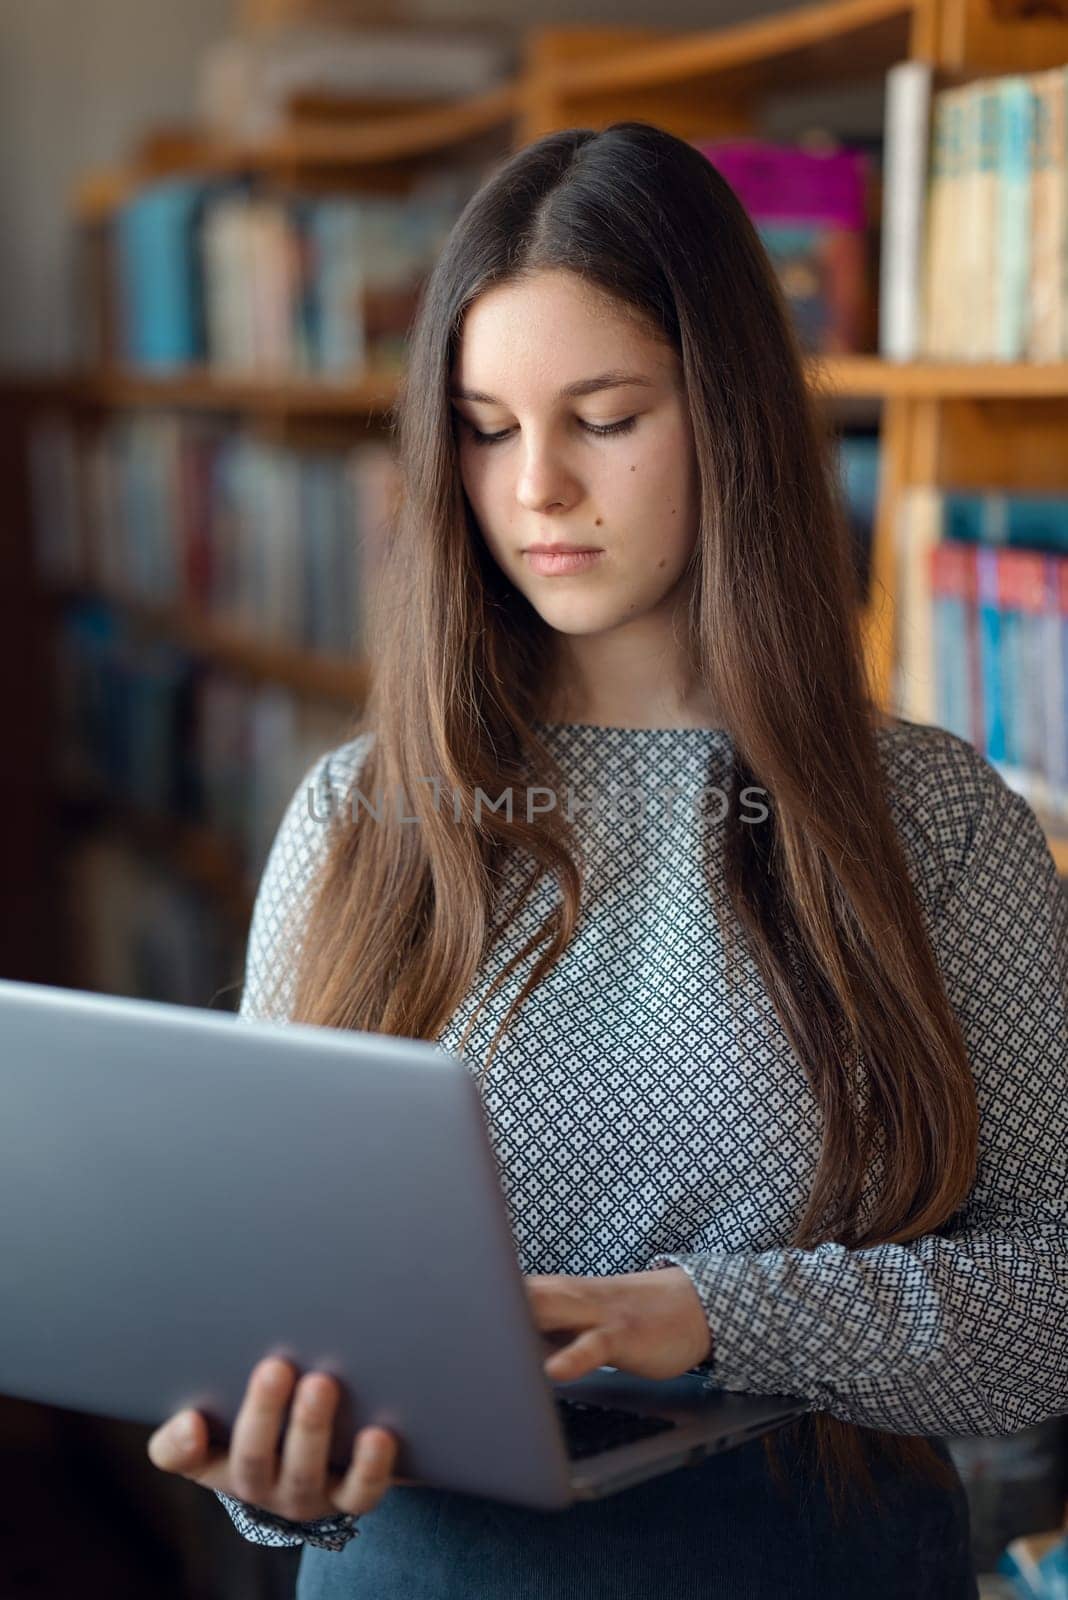 Female learner studying in library, using modern computer, study class assignment